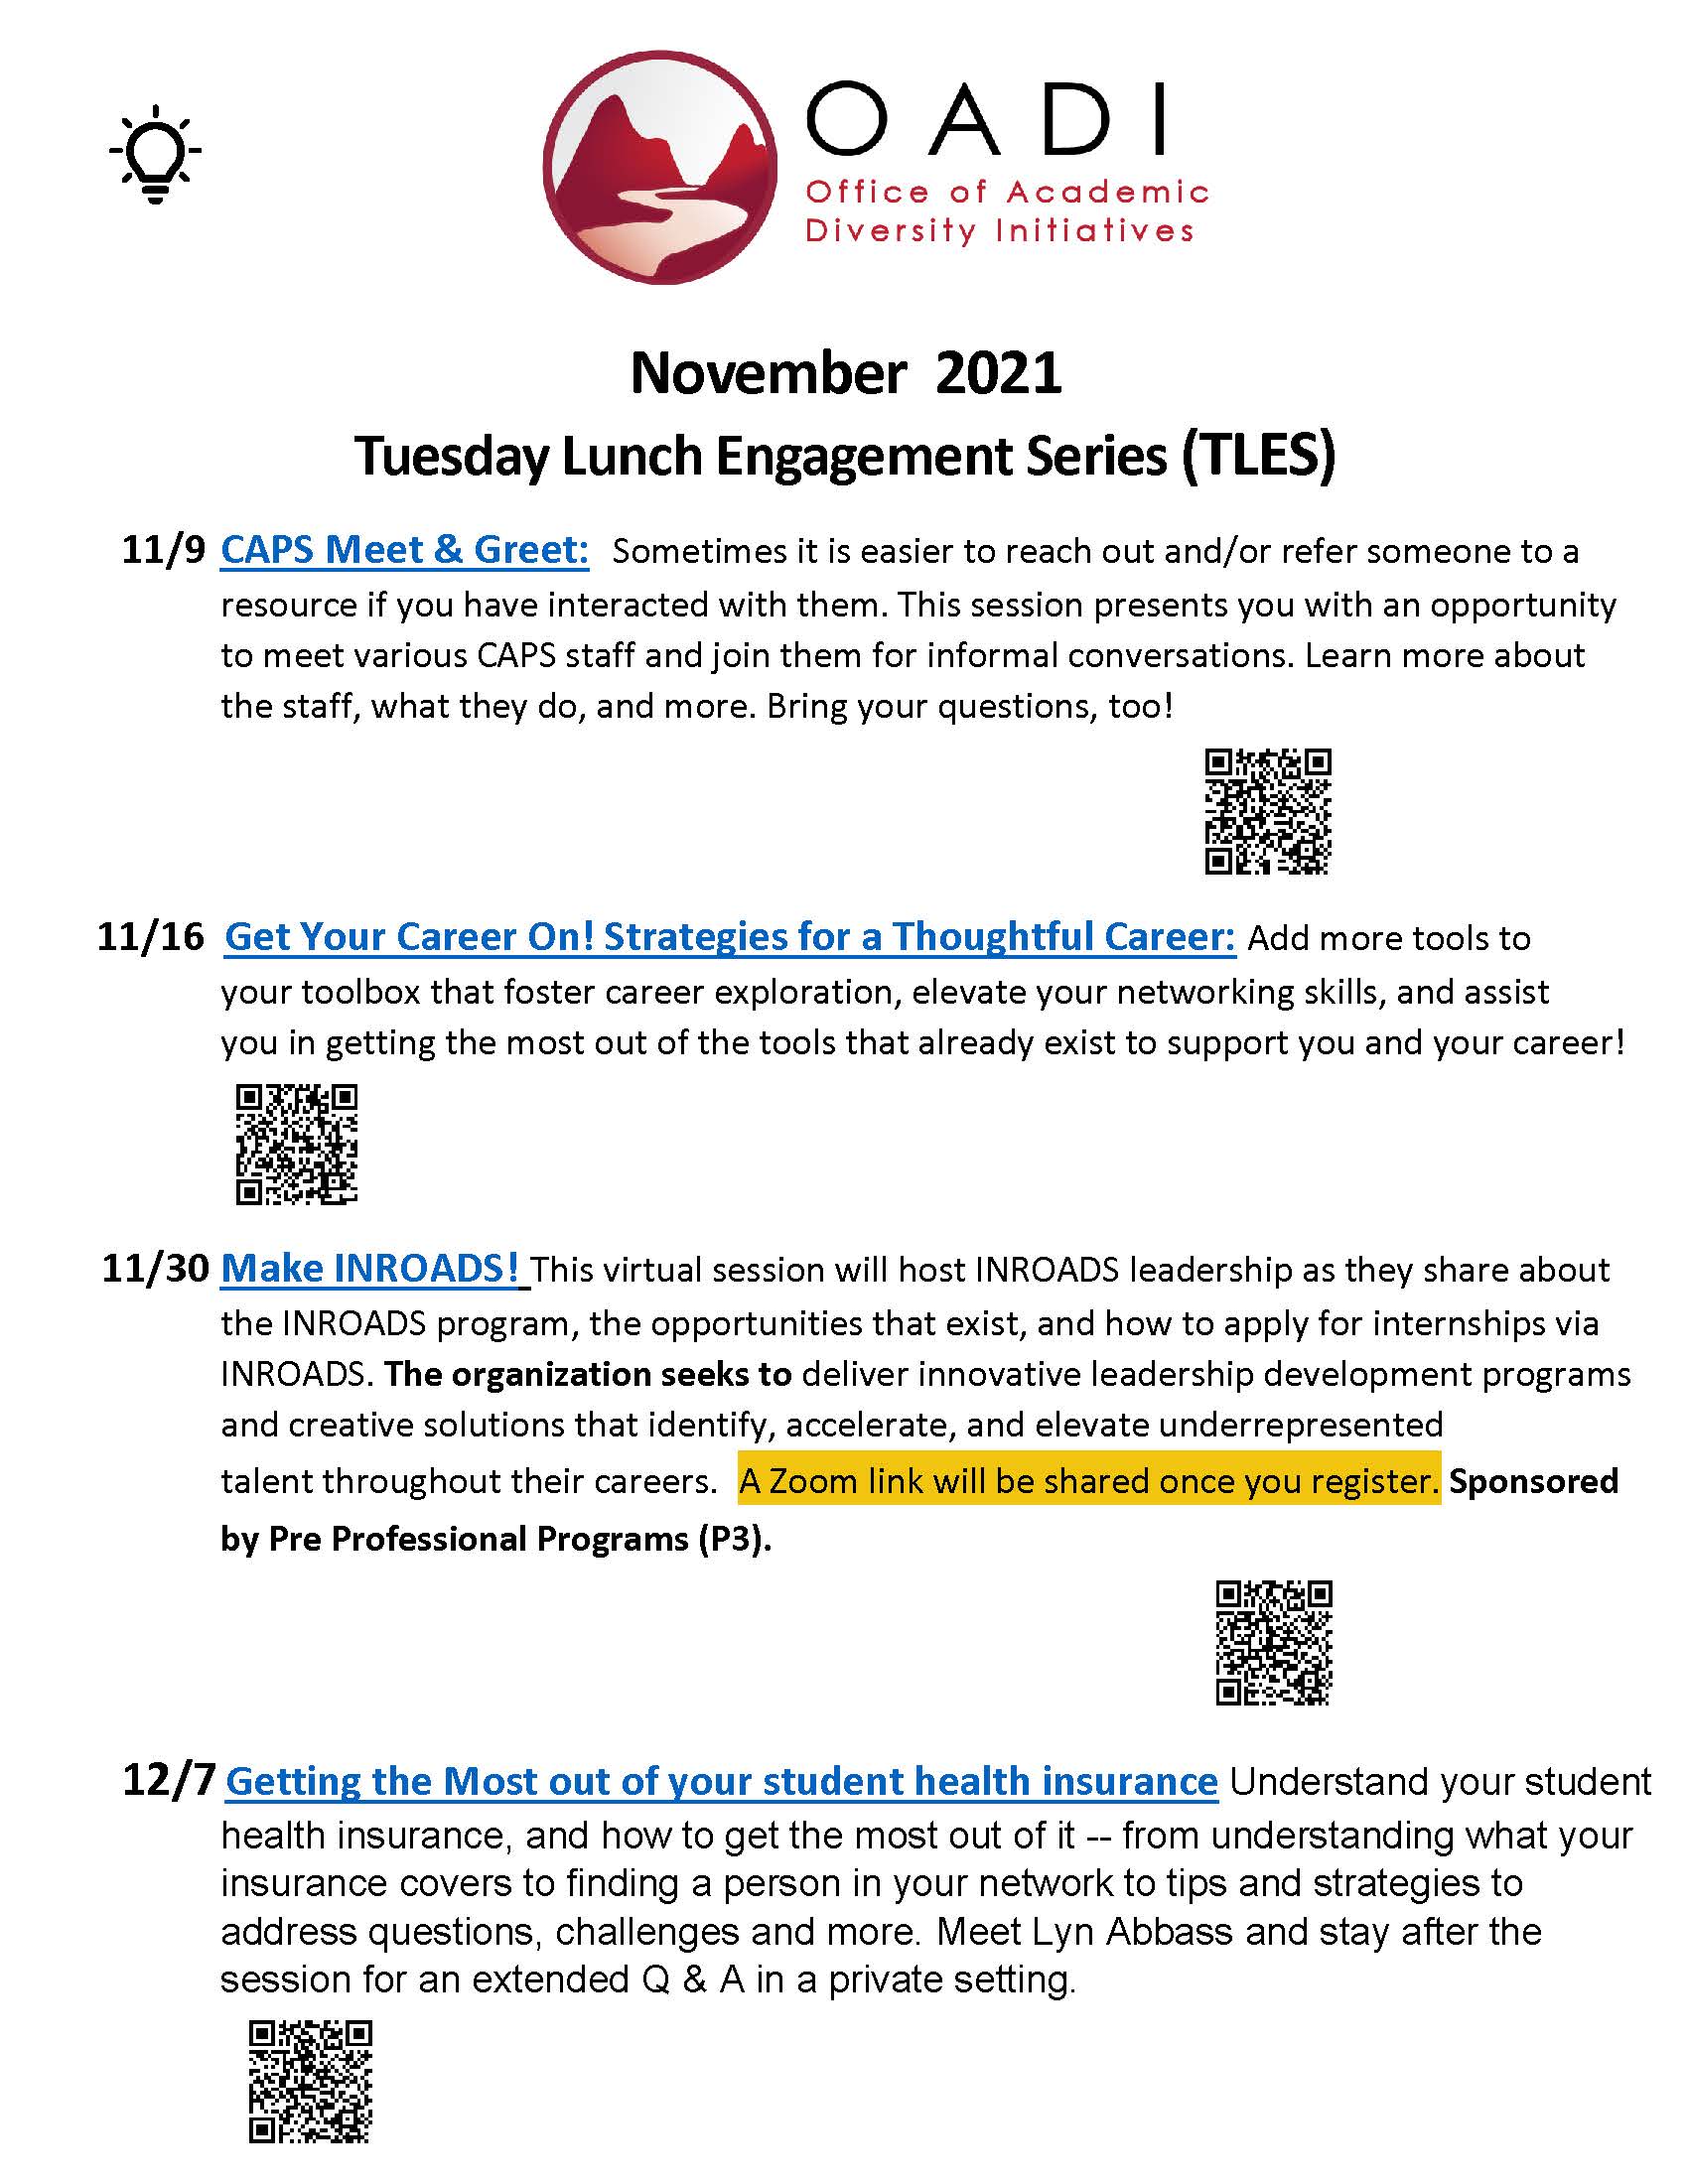 Flyer with descriptions of the November and December 2021 Tuesday Lunch Engagement Series events